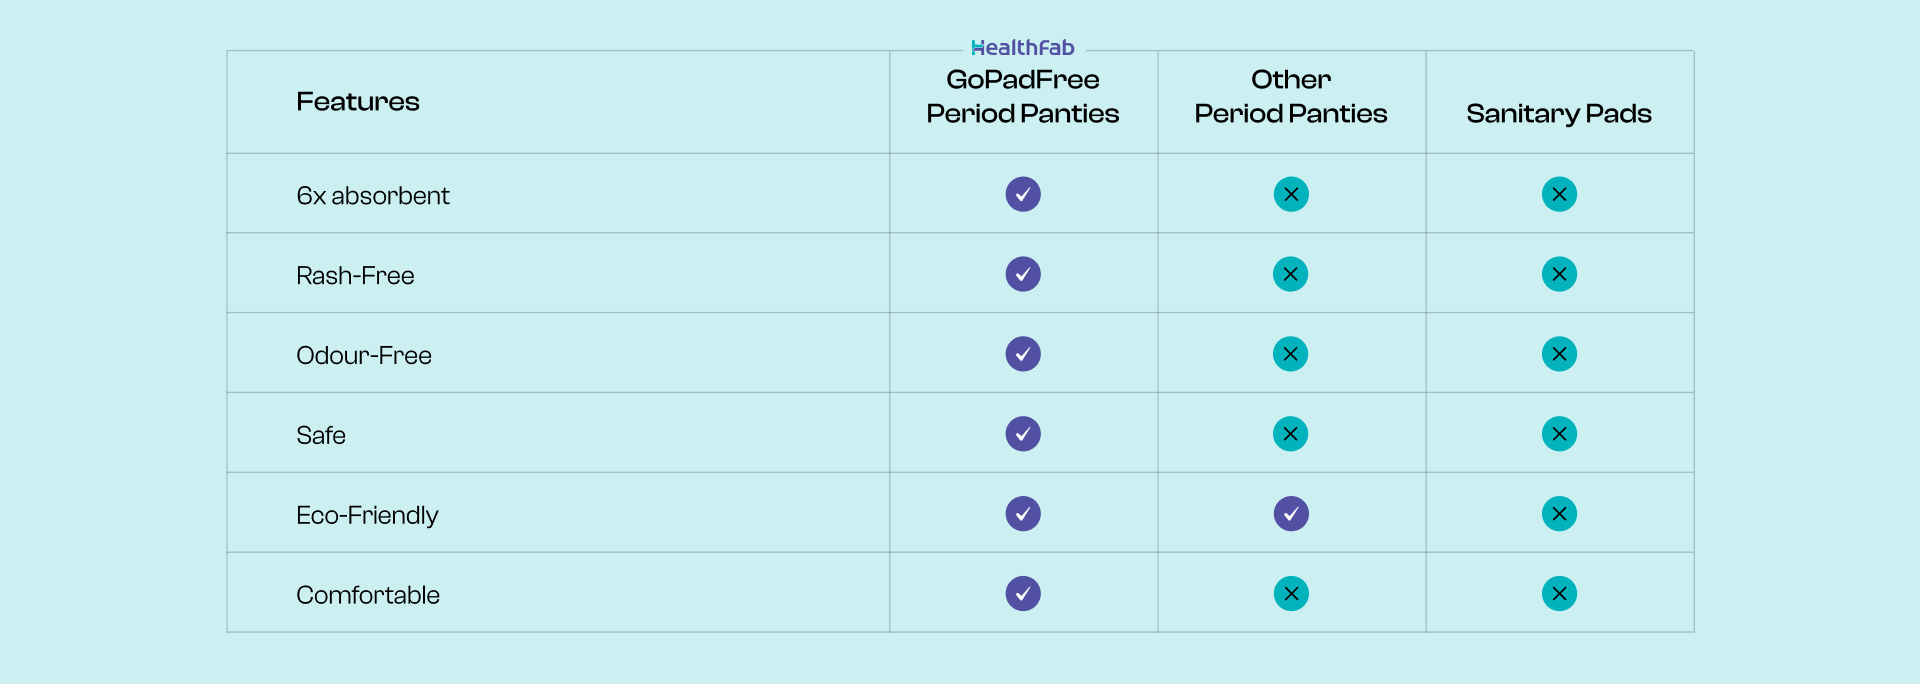 comparison between gopadfree vs other period panties vs sanitary pads